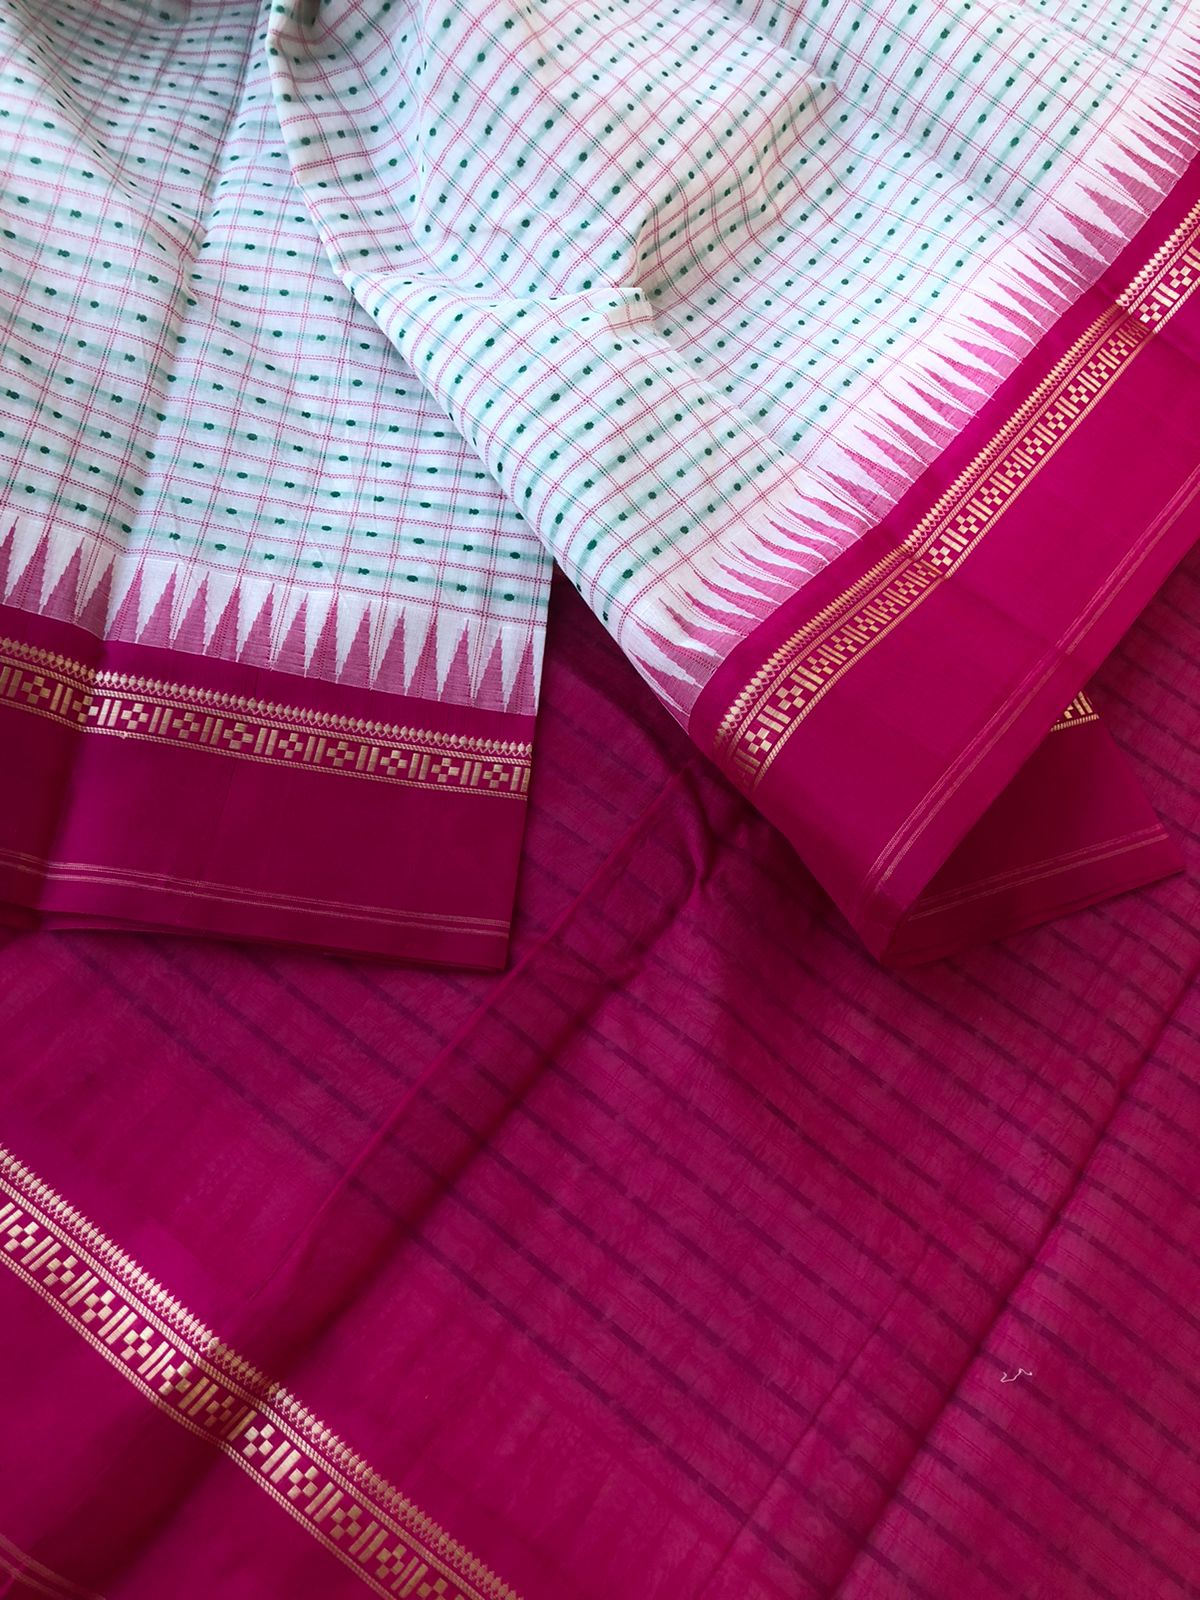 Mira - Our Exclusive Cotton body with Pure Silk Korvai Borders - off white and Indian pink with full body green tone  Lakshadeepam buttas